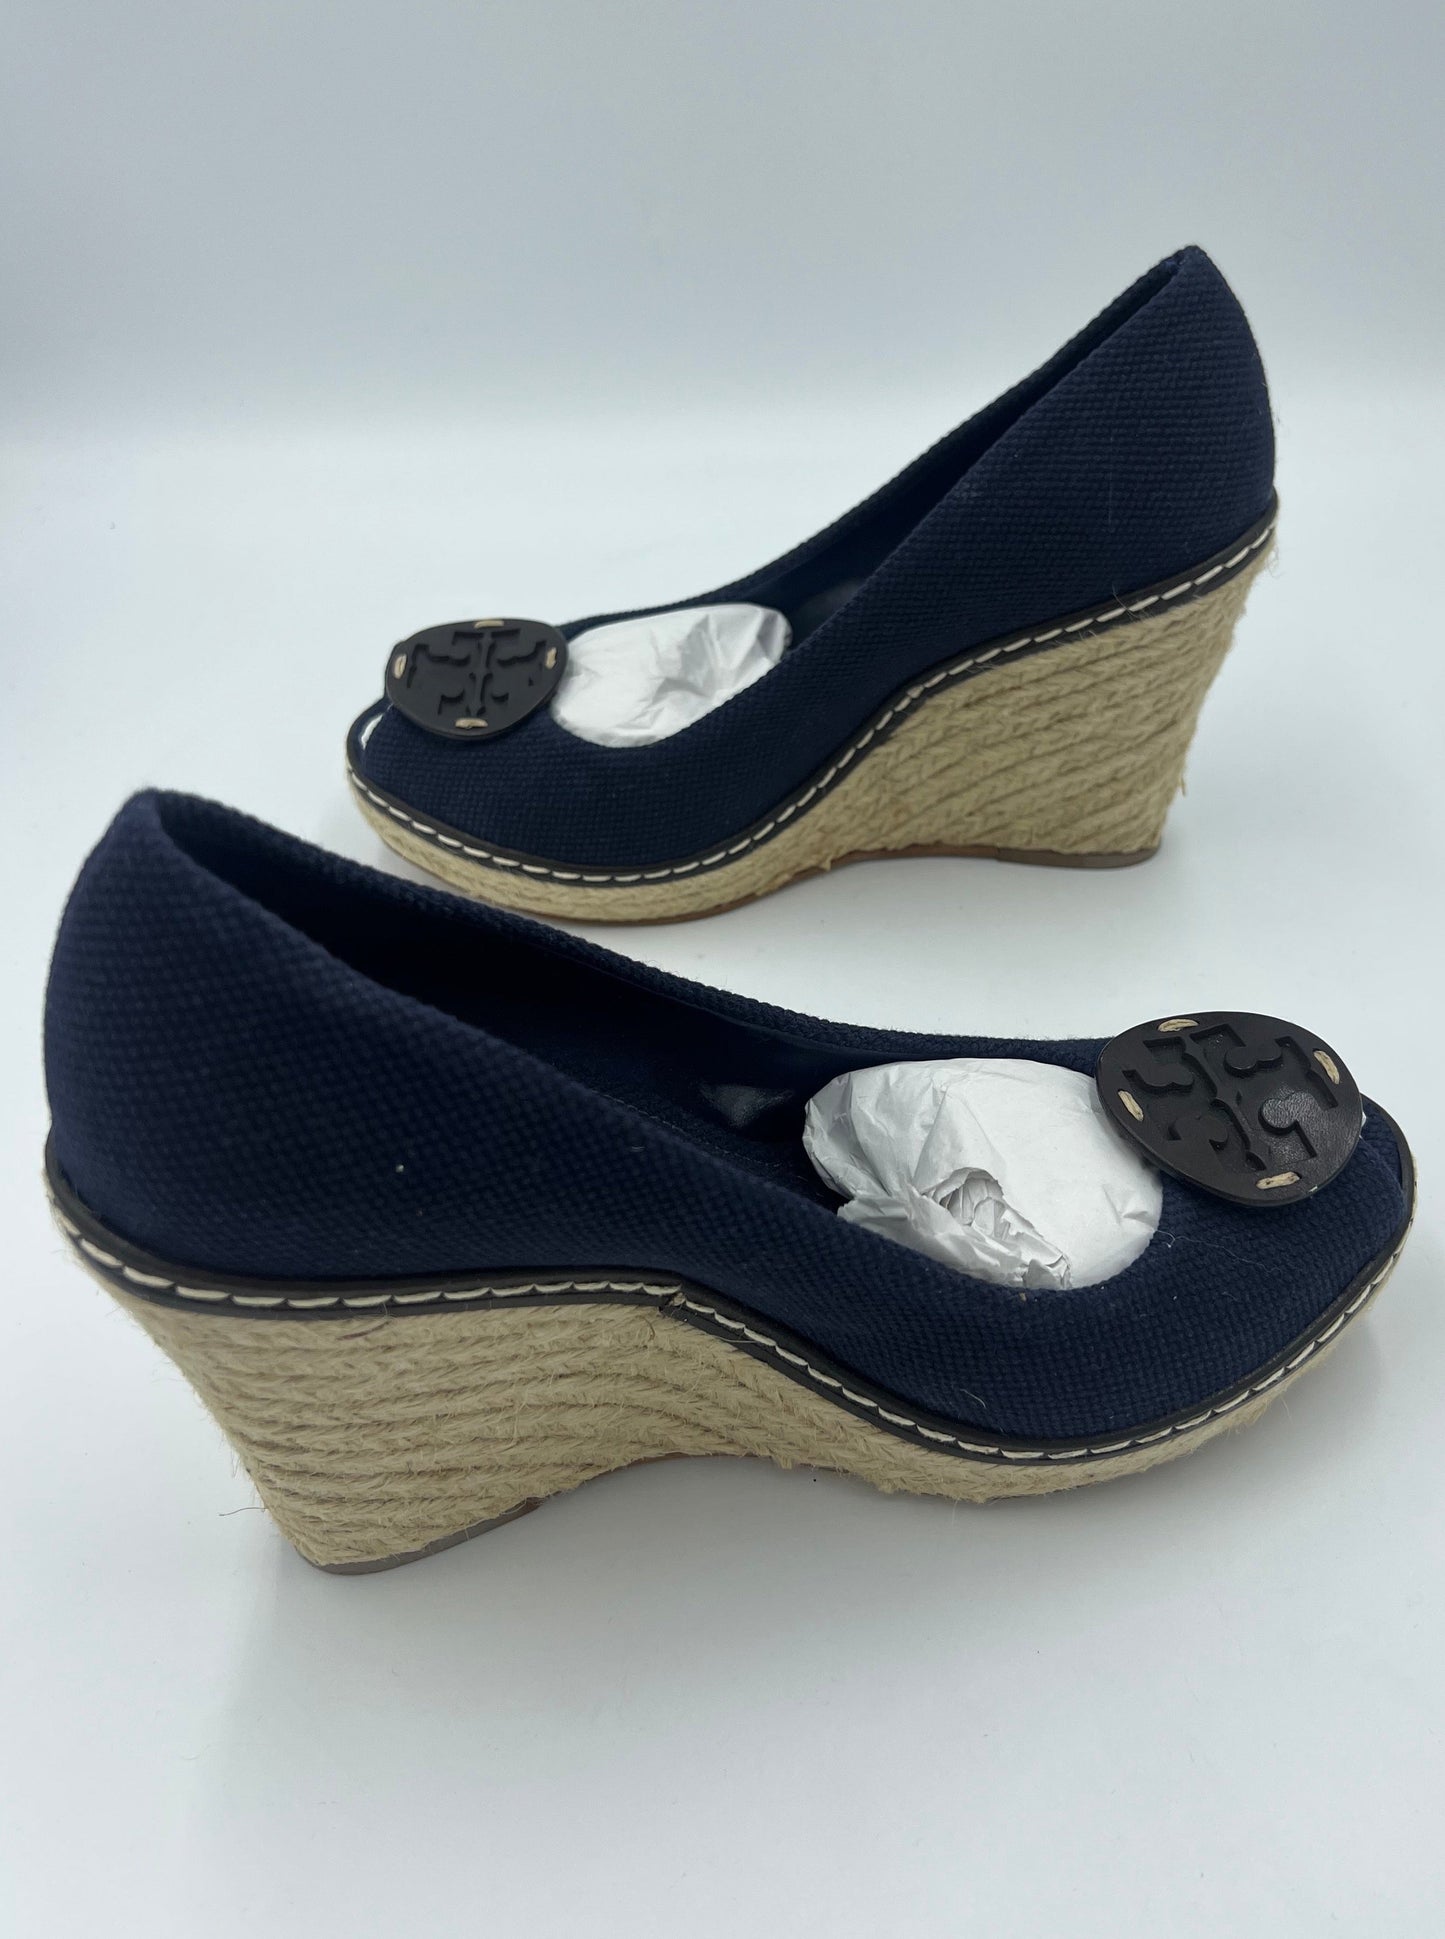 Shoes Designer By Tory Burch  Size: 9.5